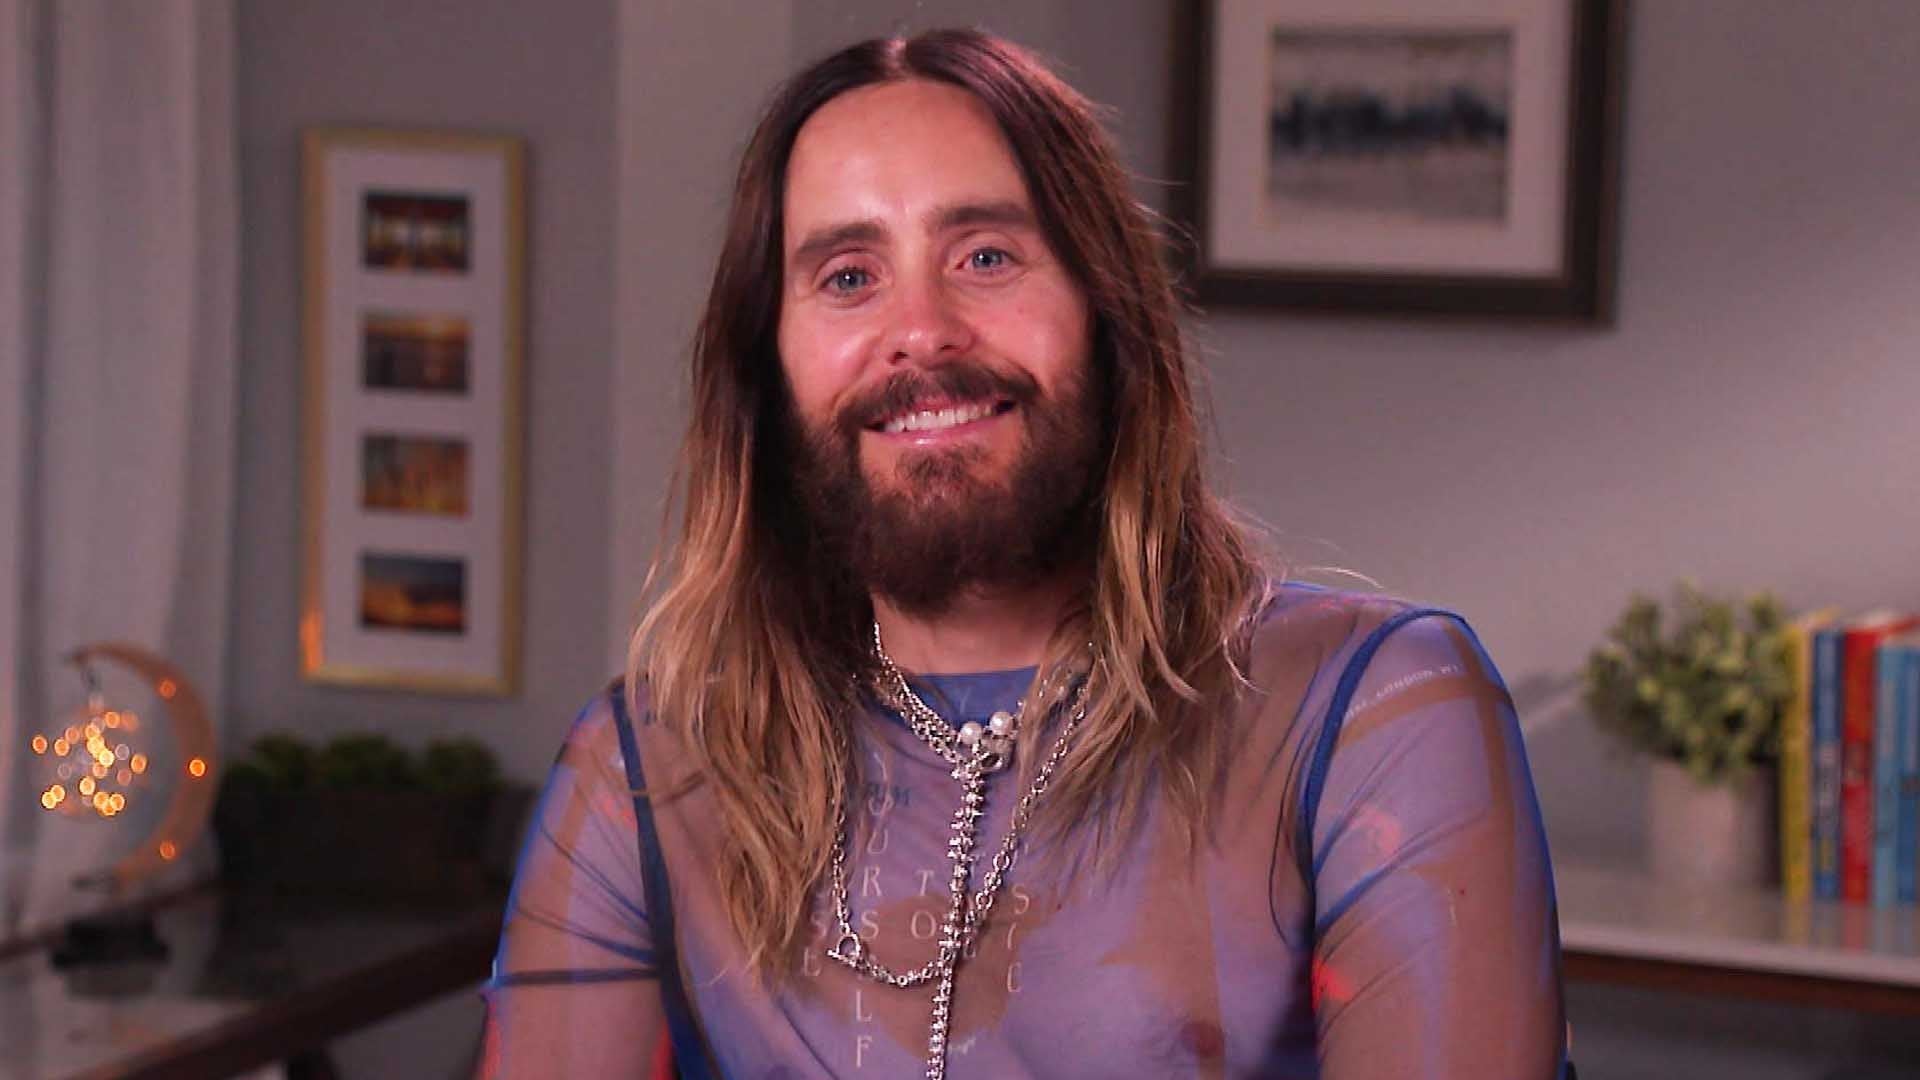 Jared Leto Spills on His New Album and Habit of Climbing Buildings